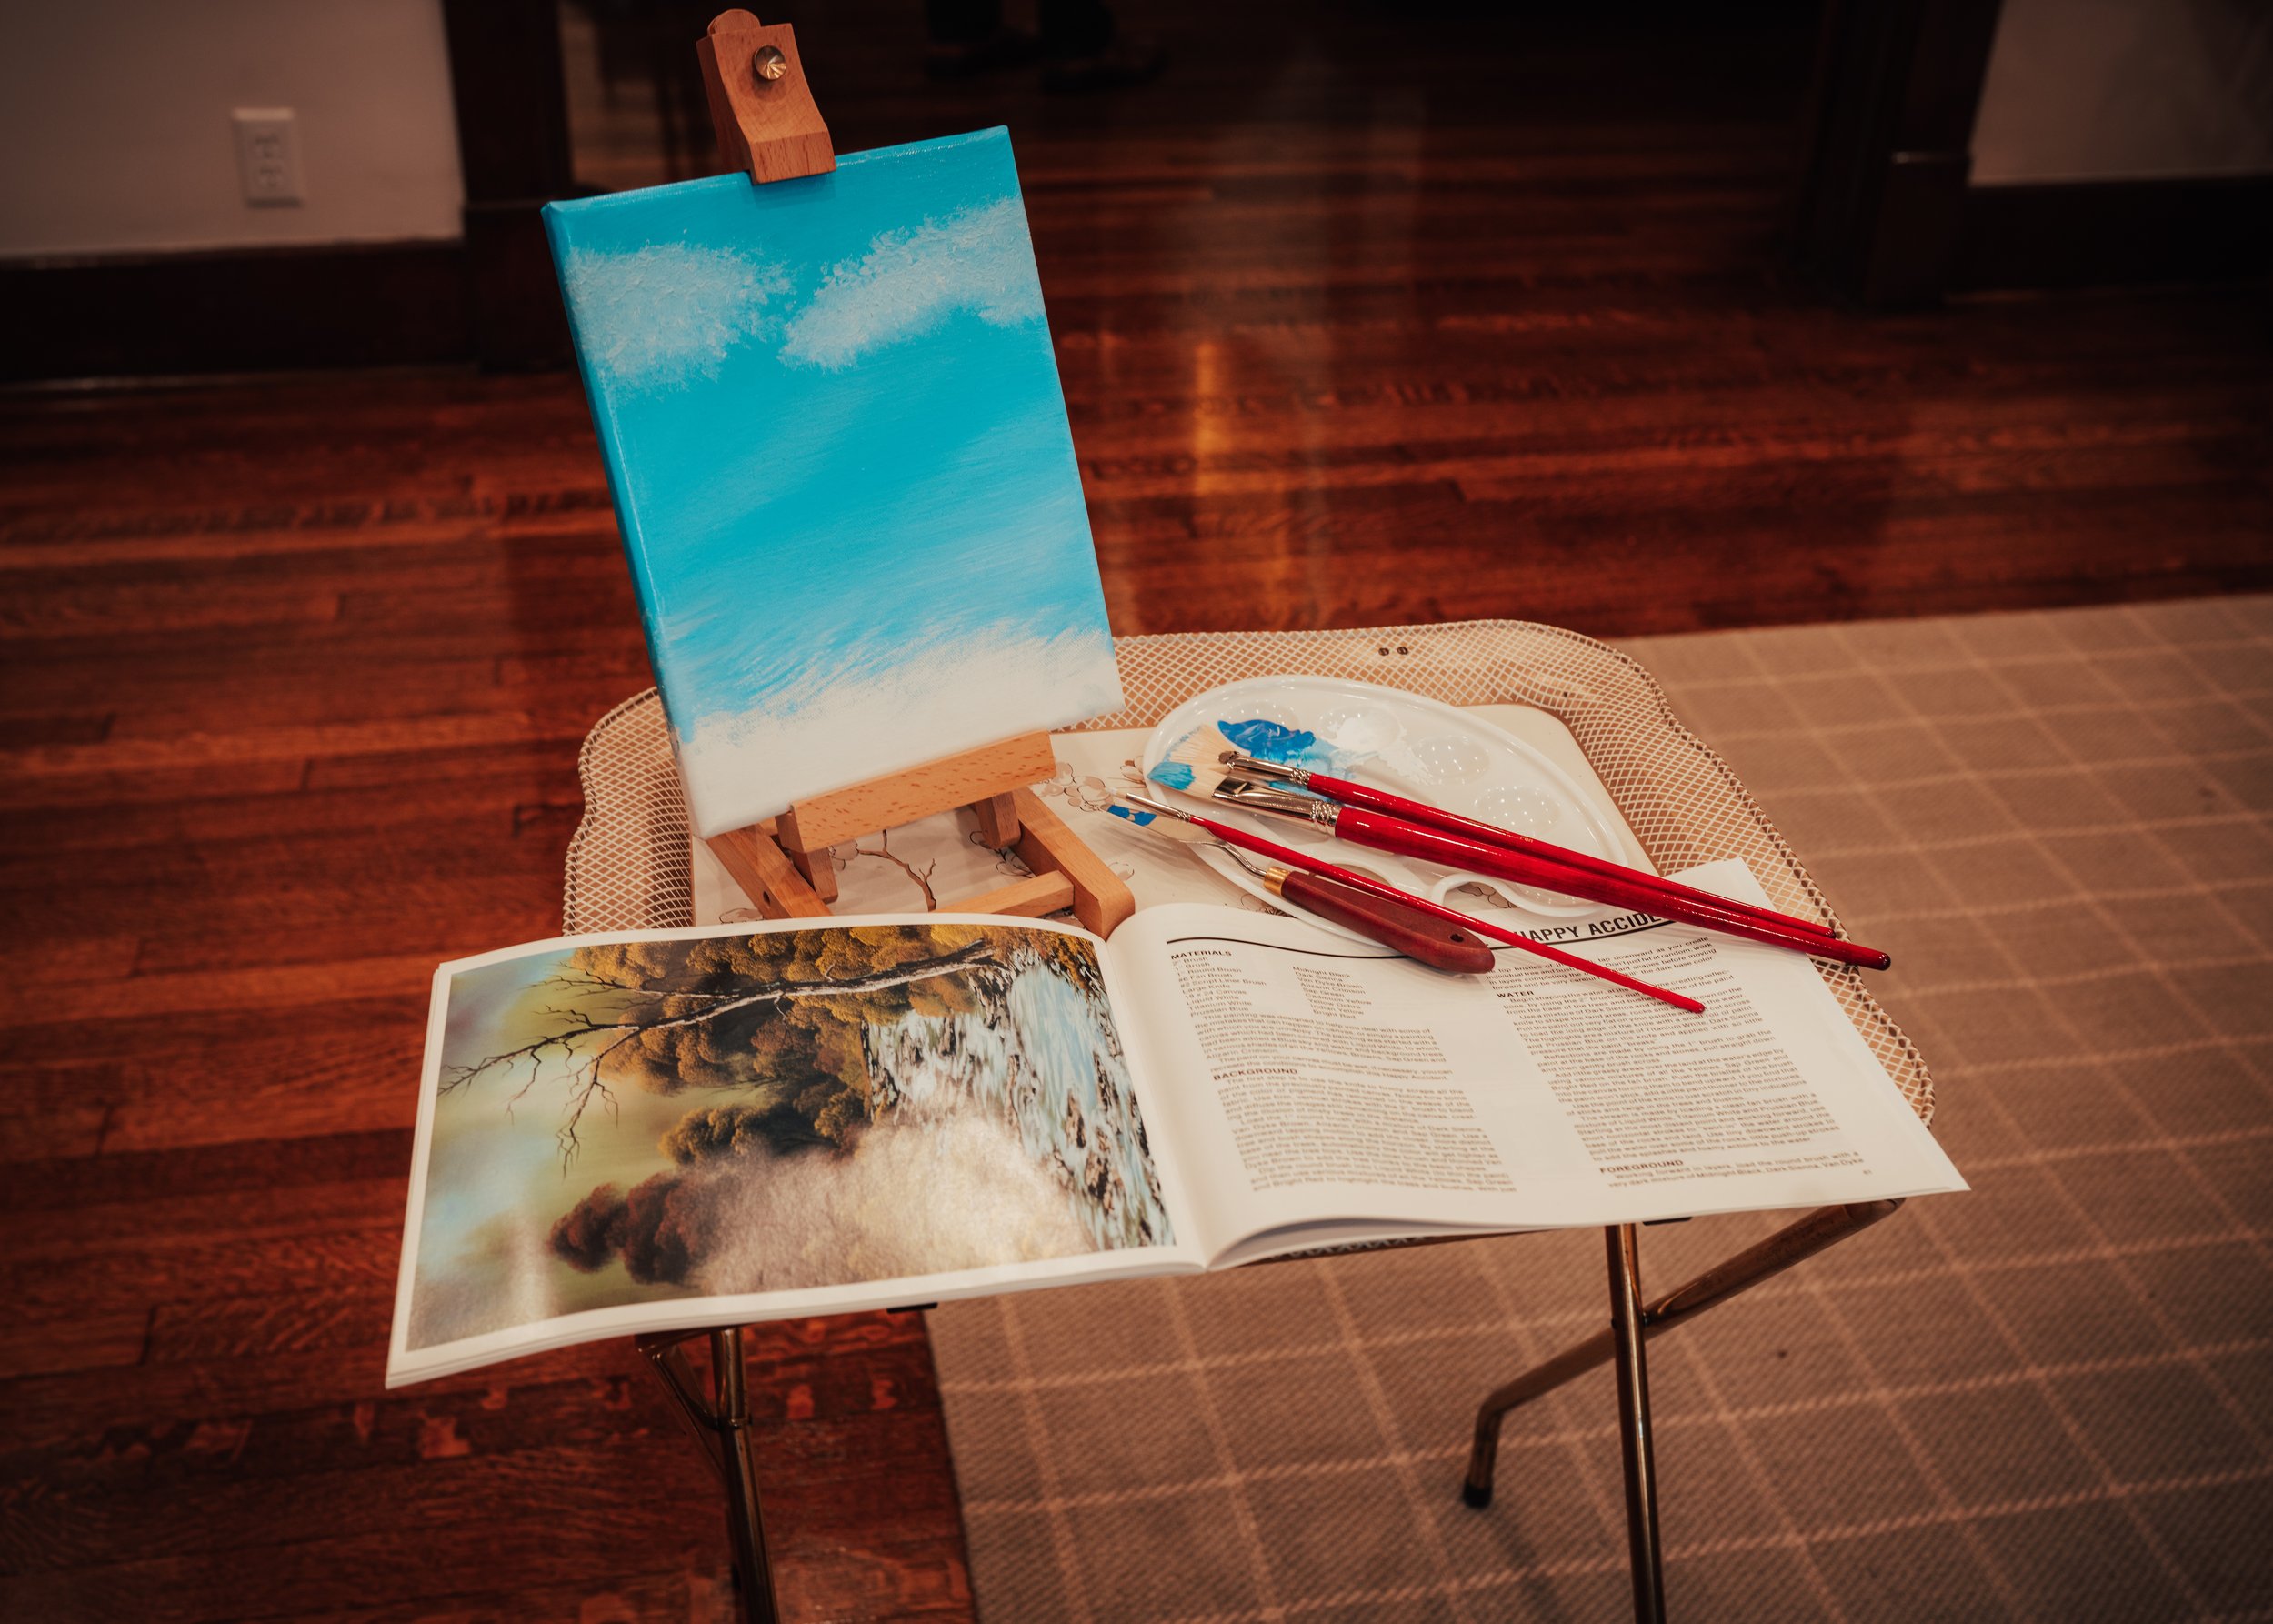 The Bob Ross Experience at Minnetrista - RaulersonGirlsTravel